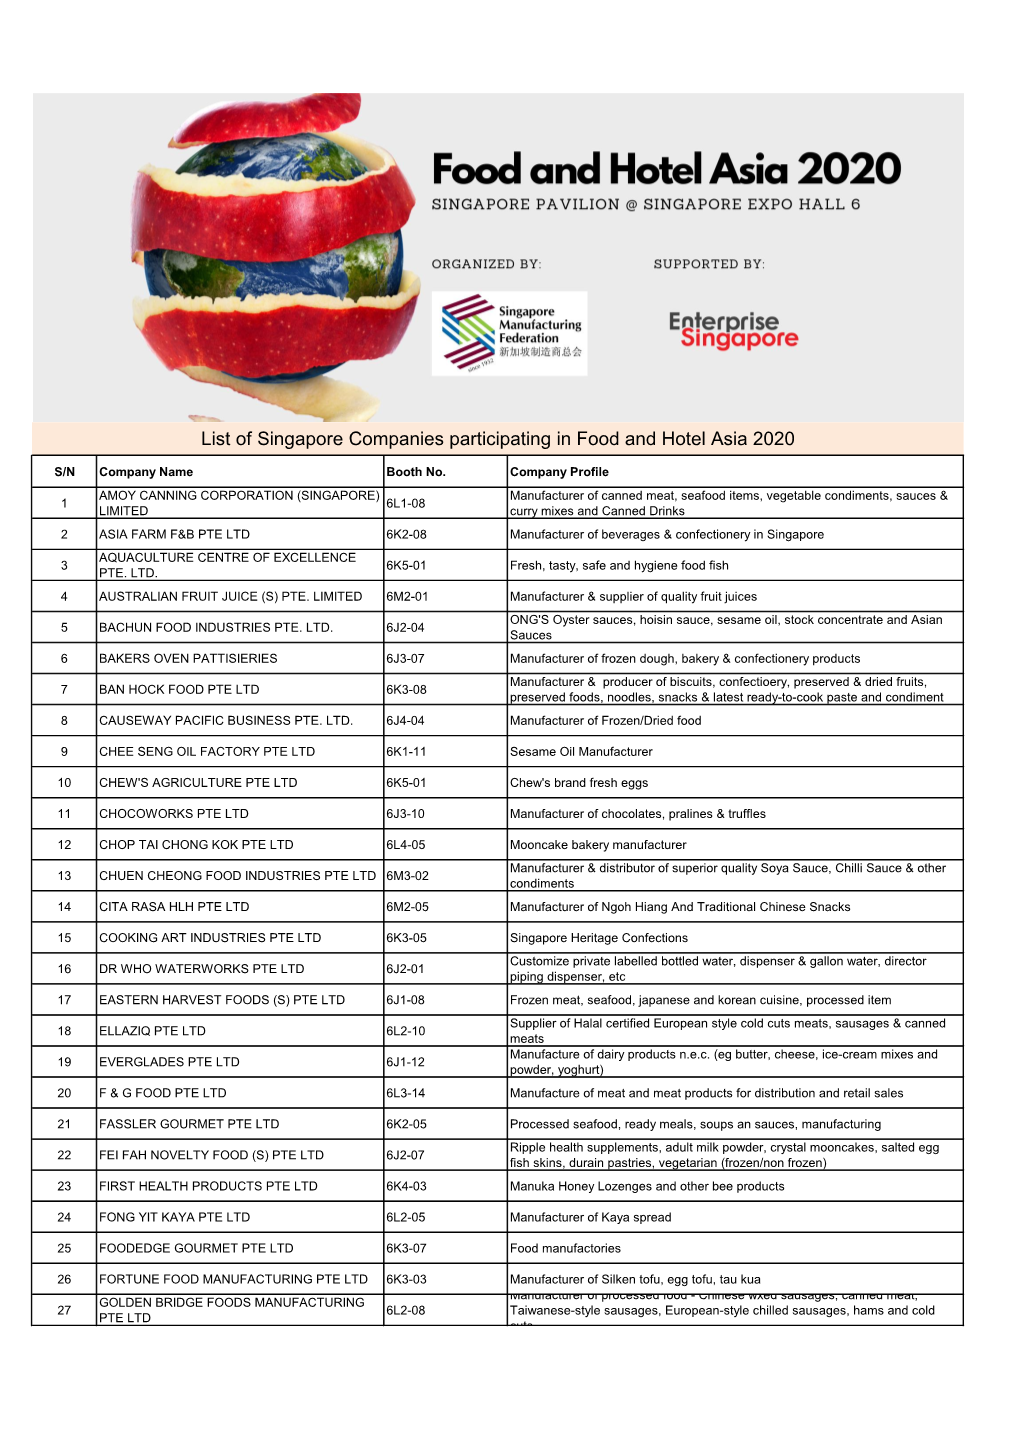 List of Singapore Companies Participating in Food and Hotel Asia 2020